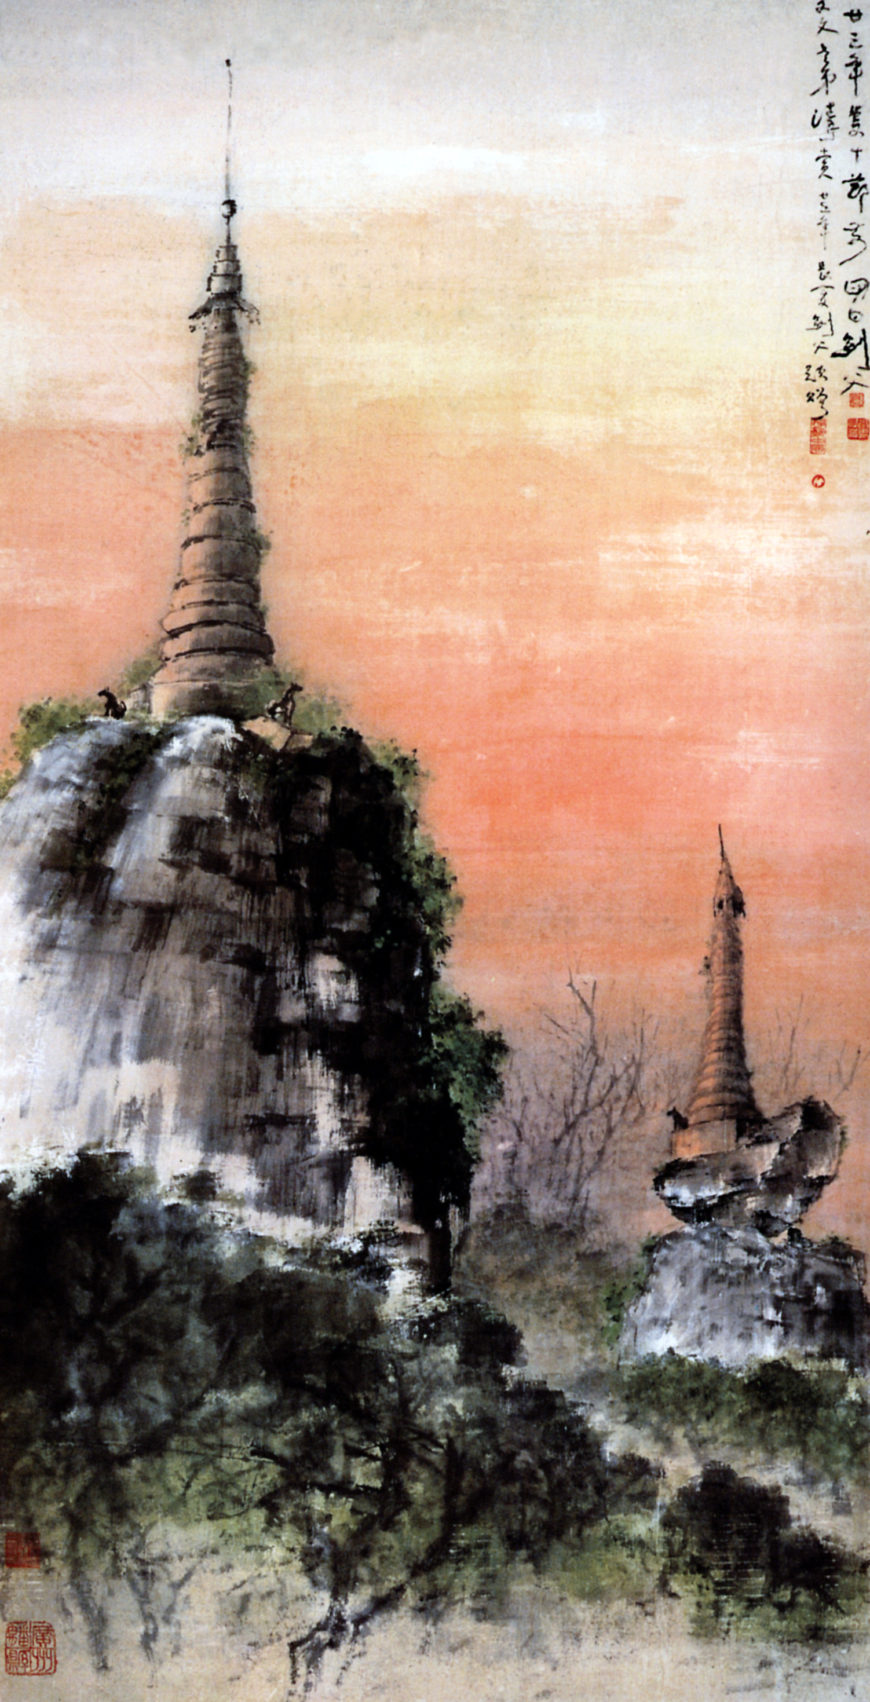 Gao Jianfu (1879-1951), Stupa Remains in Burma, 1934, hanging scroll, ink and color on paper. 162 x 84 cm. The Art Museum, Chinese University of Hong Kong.